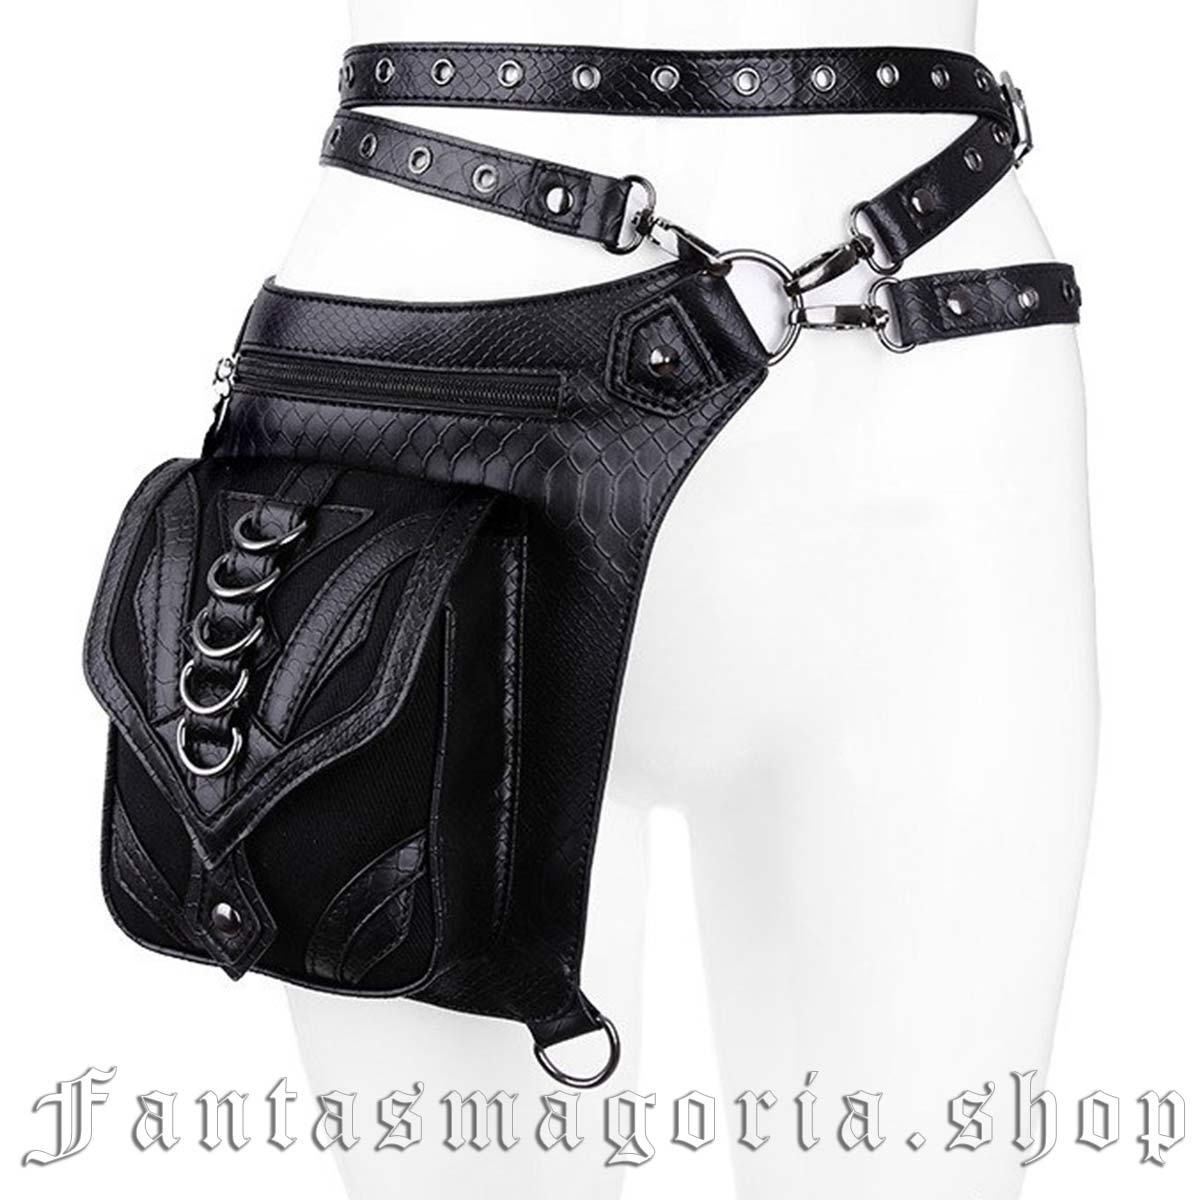 Gothic faux leather dragon skin pattern holster waist bag. - Restyle - RES5903313954372